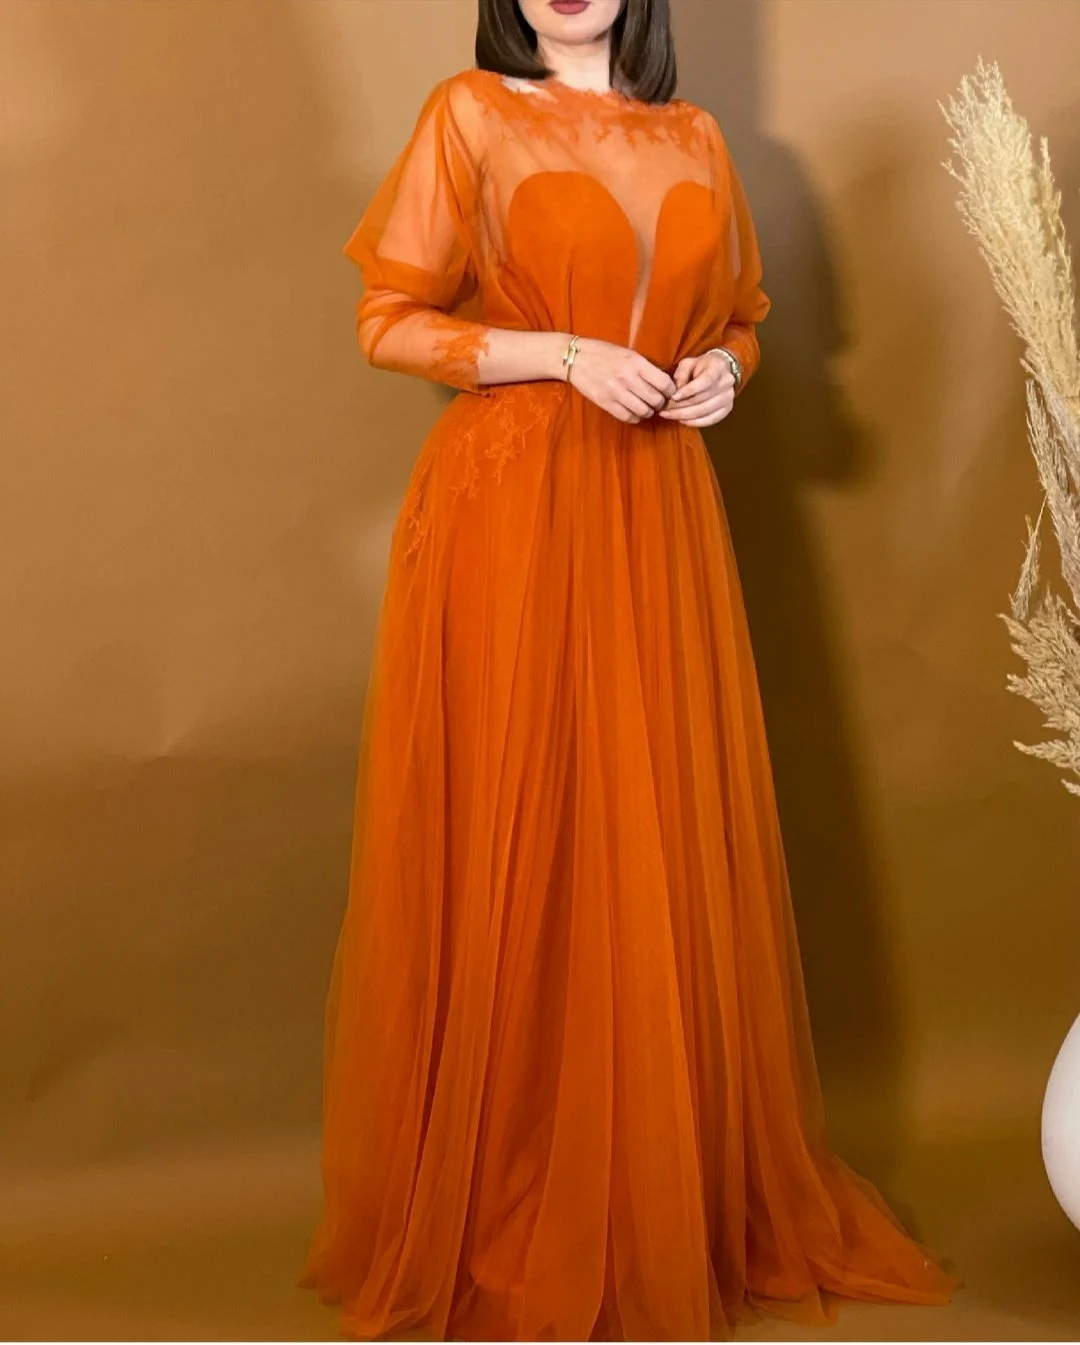 Elegant A-Line Tulle Orange Prom Dresses Long Sleeve Pleated O-Neck فساتين السهرة Party Evening Gown for women beautiful prom dresses Prom Dresses